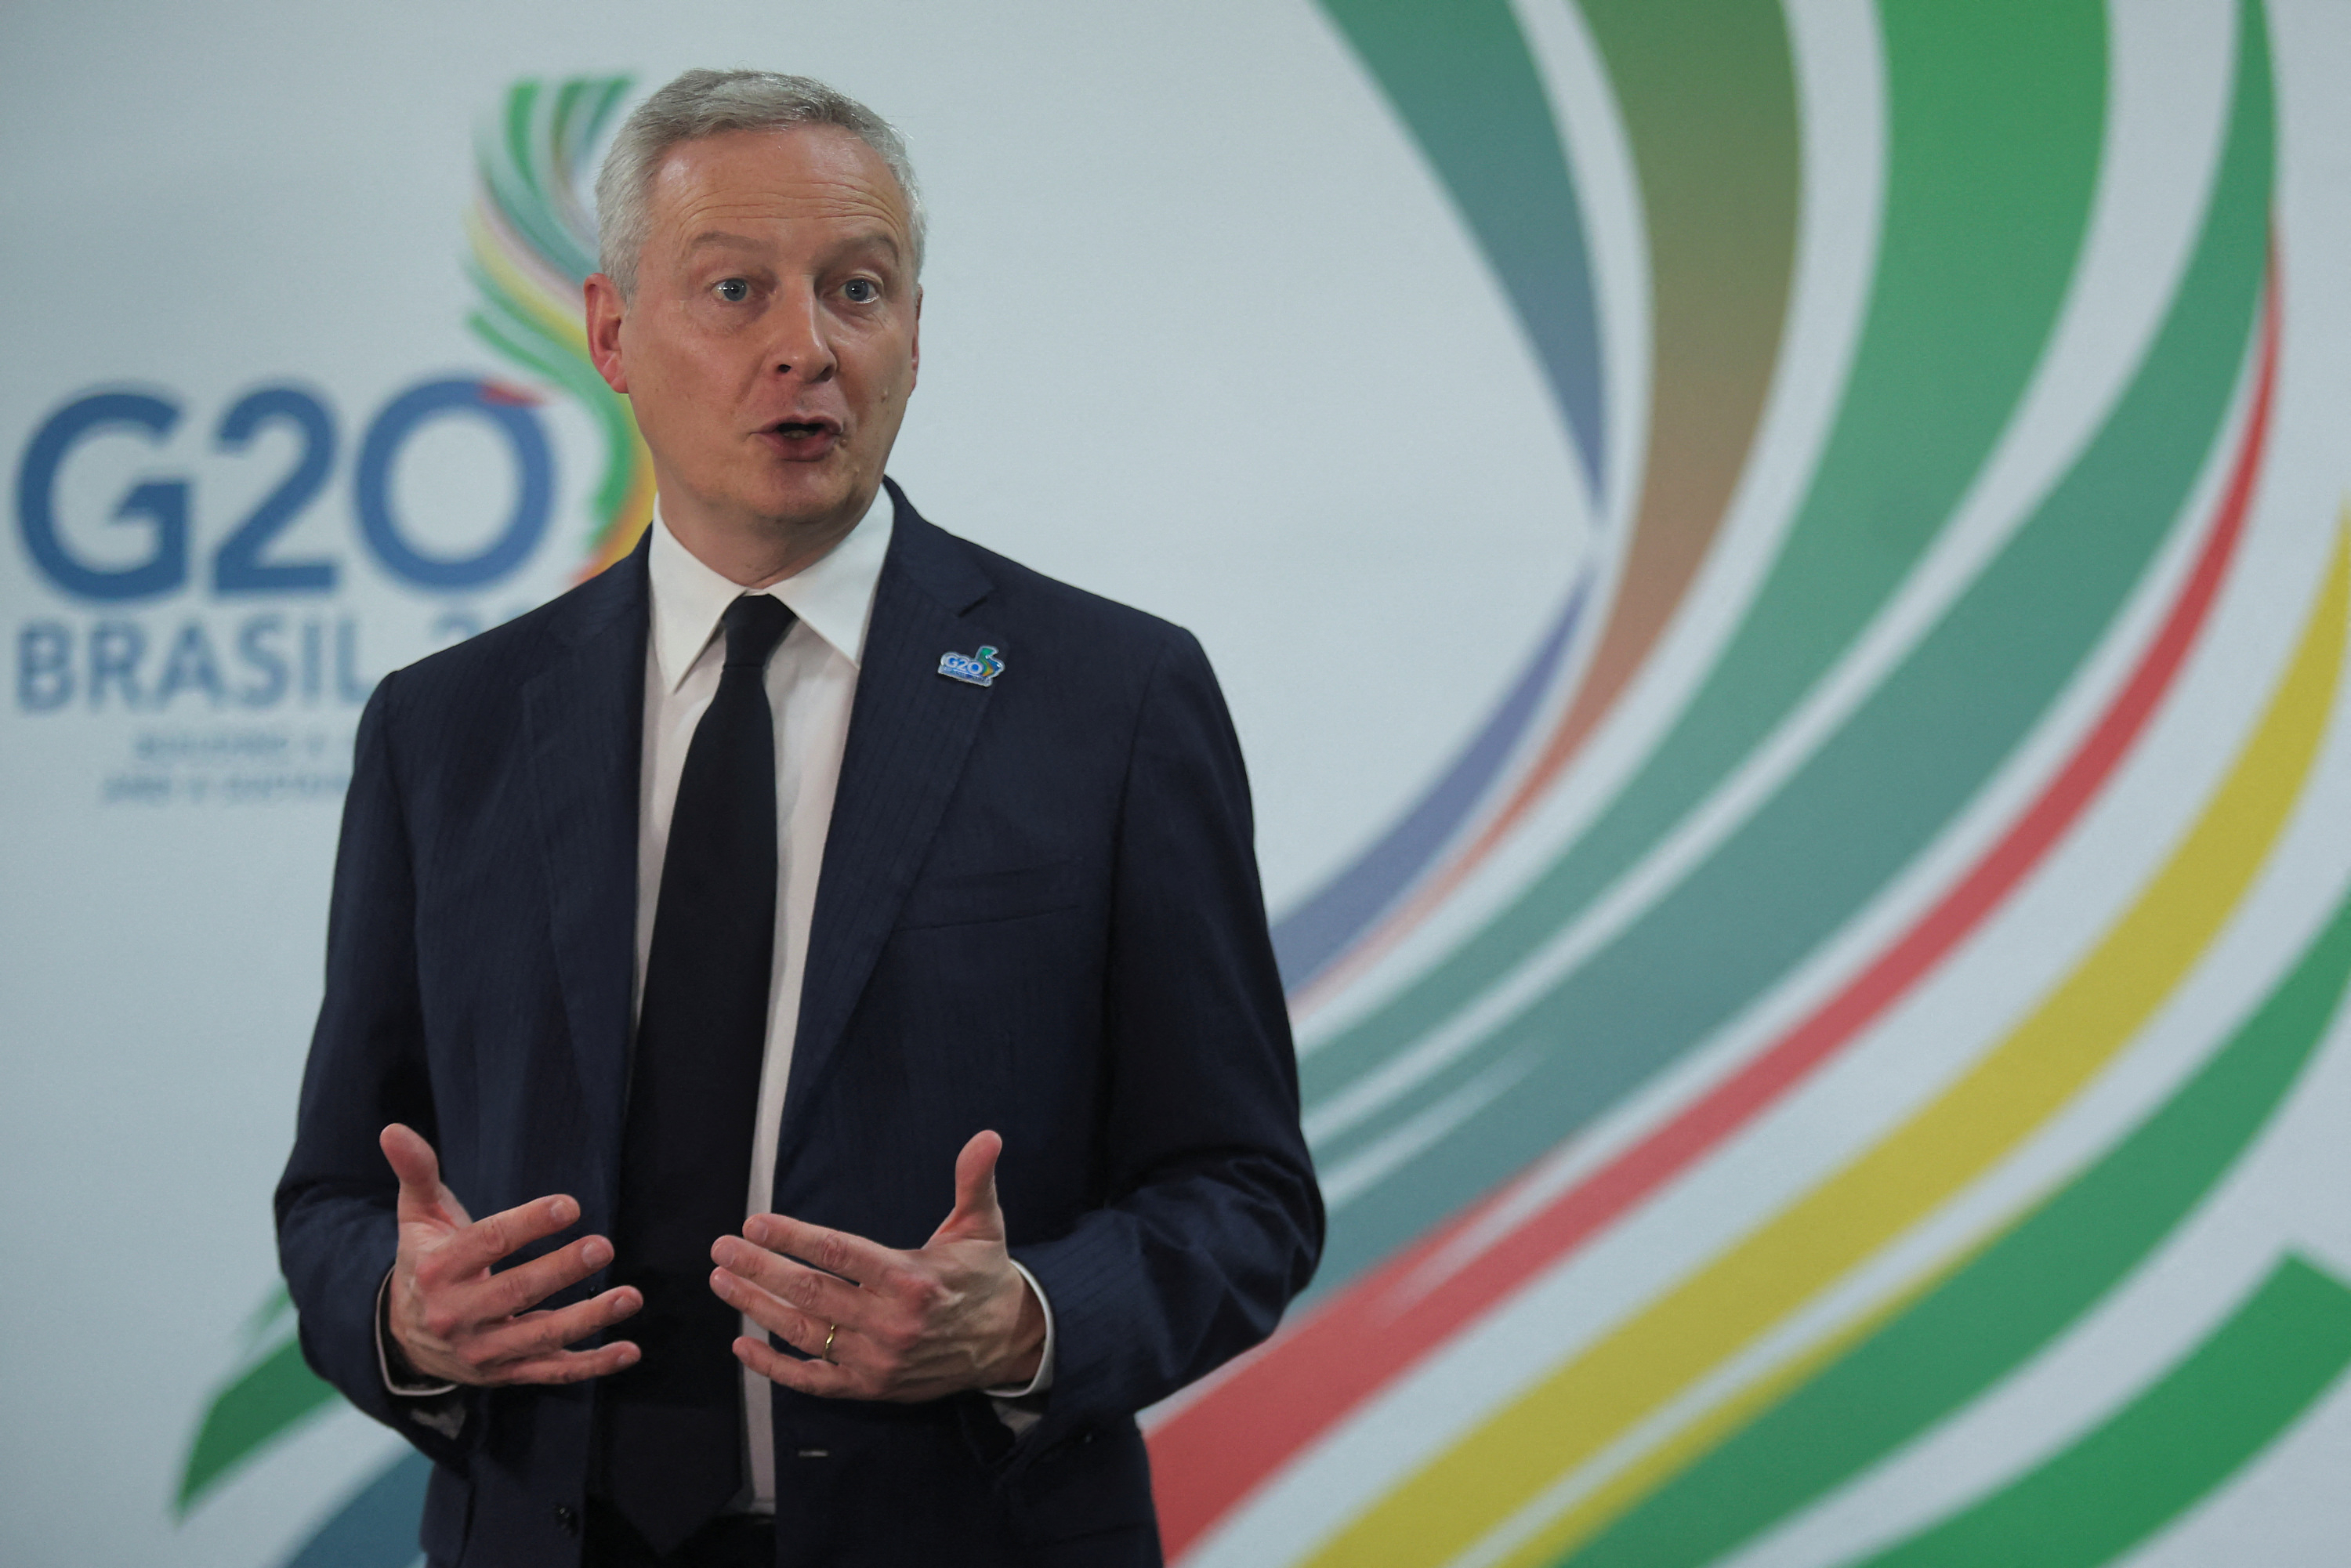 Bruno Le Maire wants to “accelerate” the idea of ​​taxing billionaires on an international scale